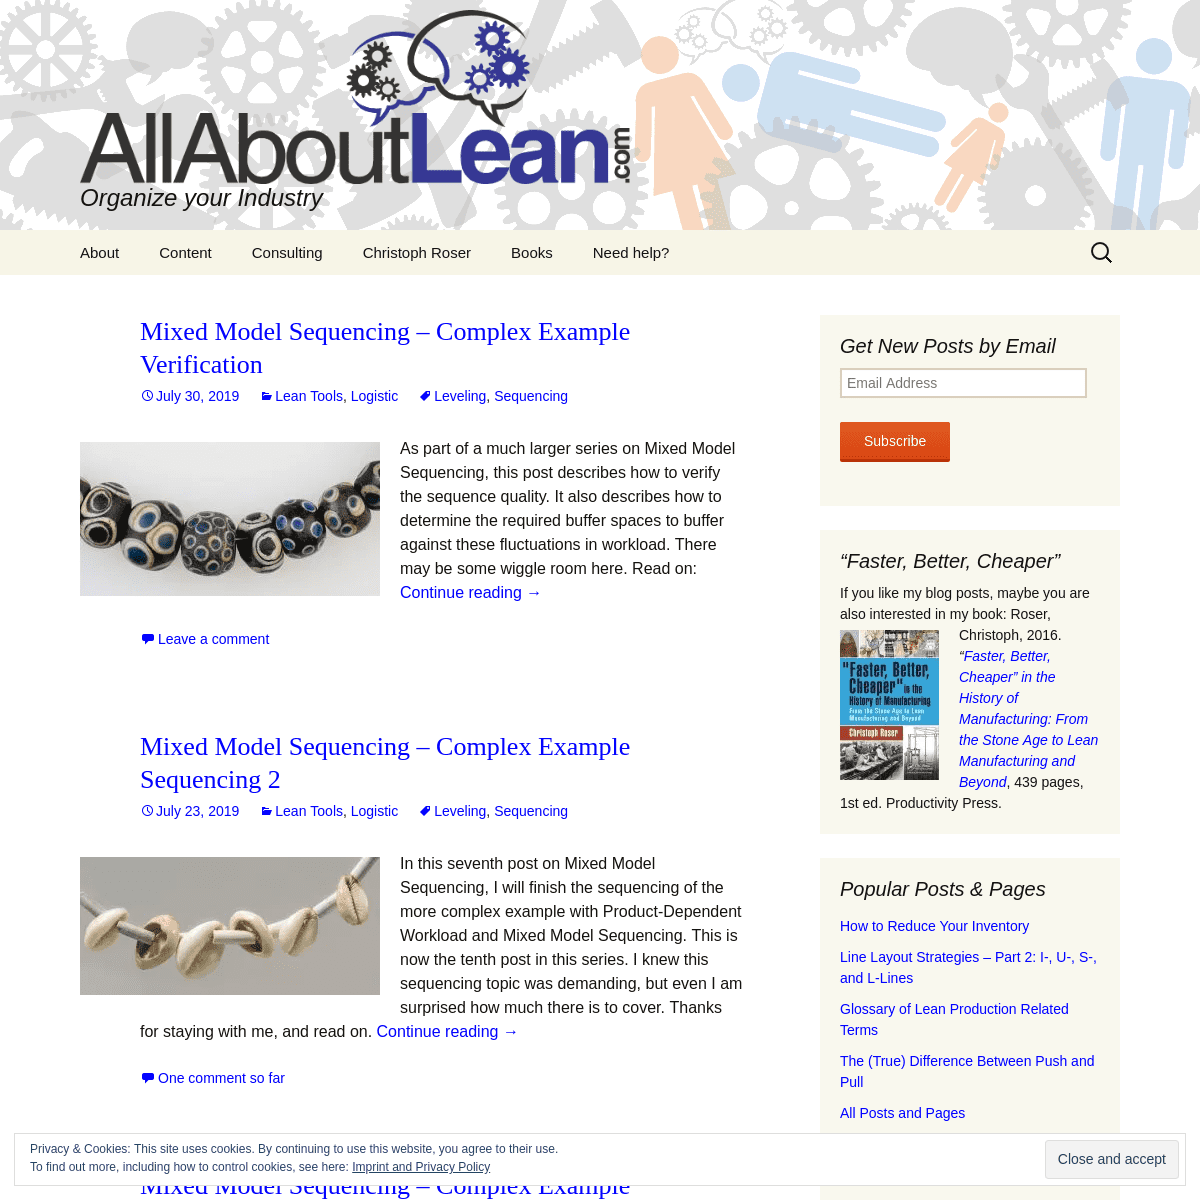 AllAboutLean.com – Organize your Industry